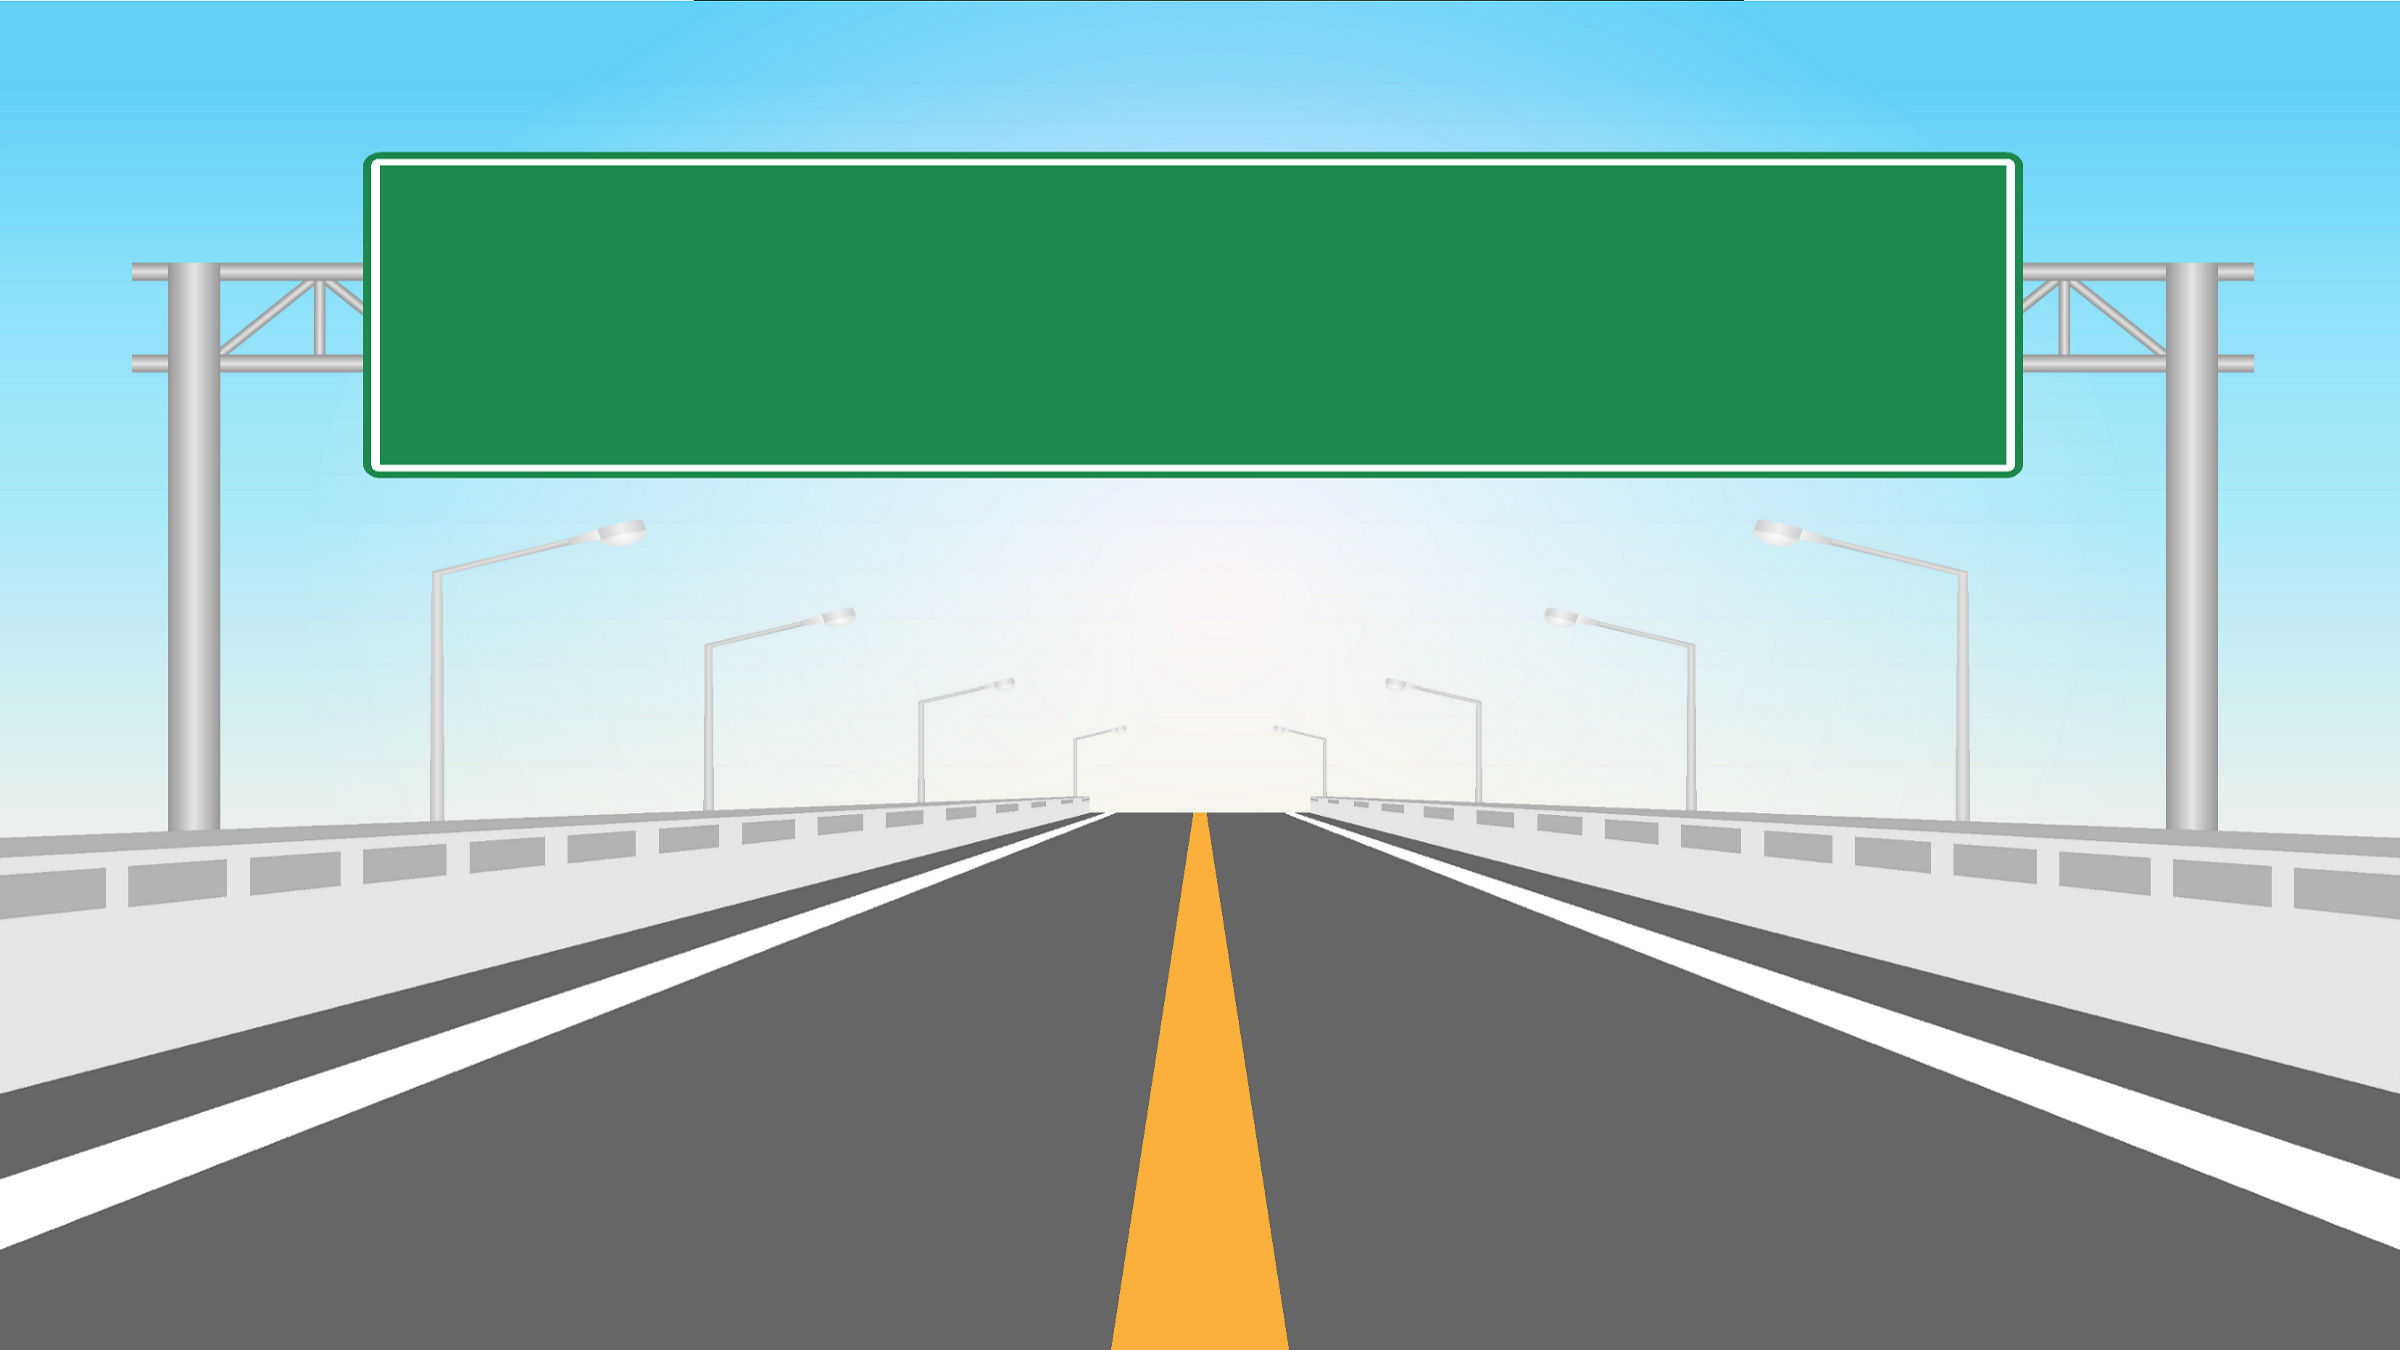 empty road sign on an empty highway, illustration